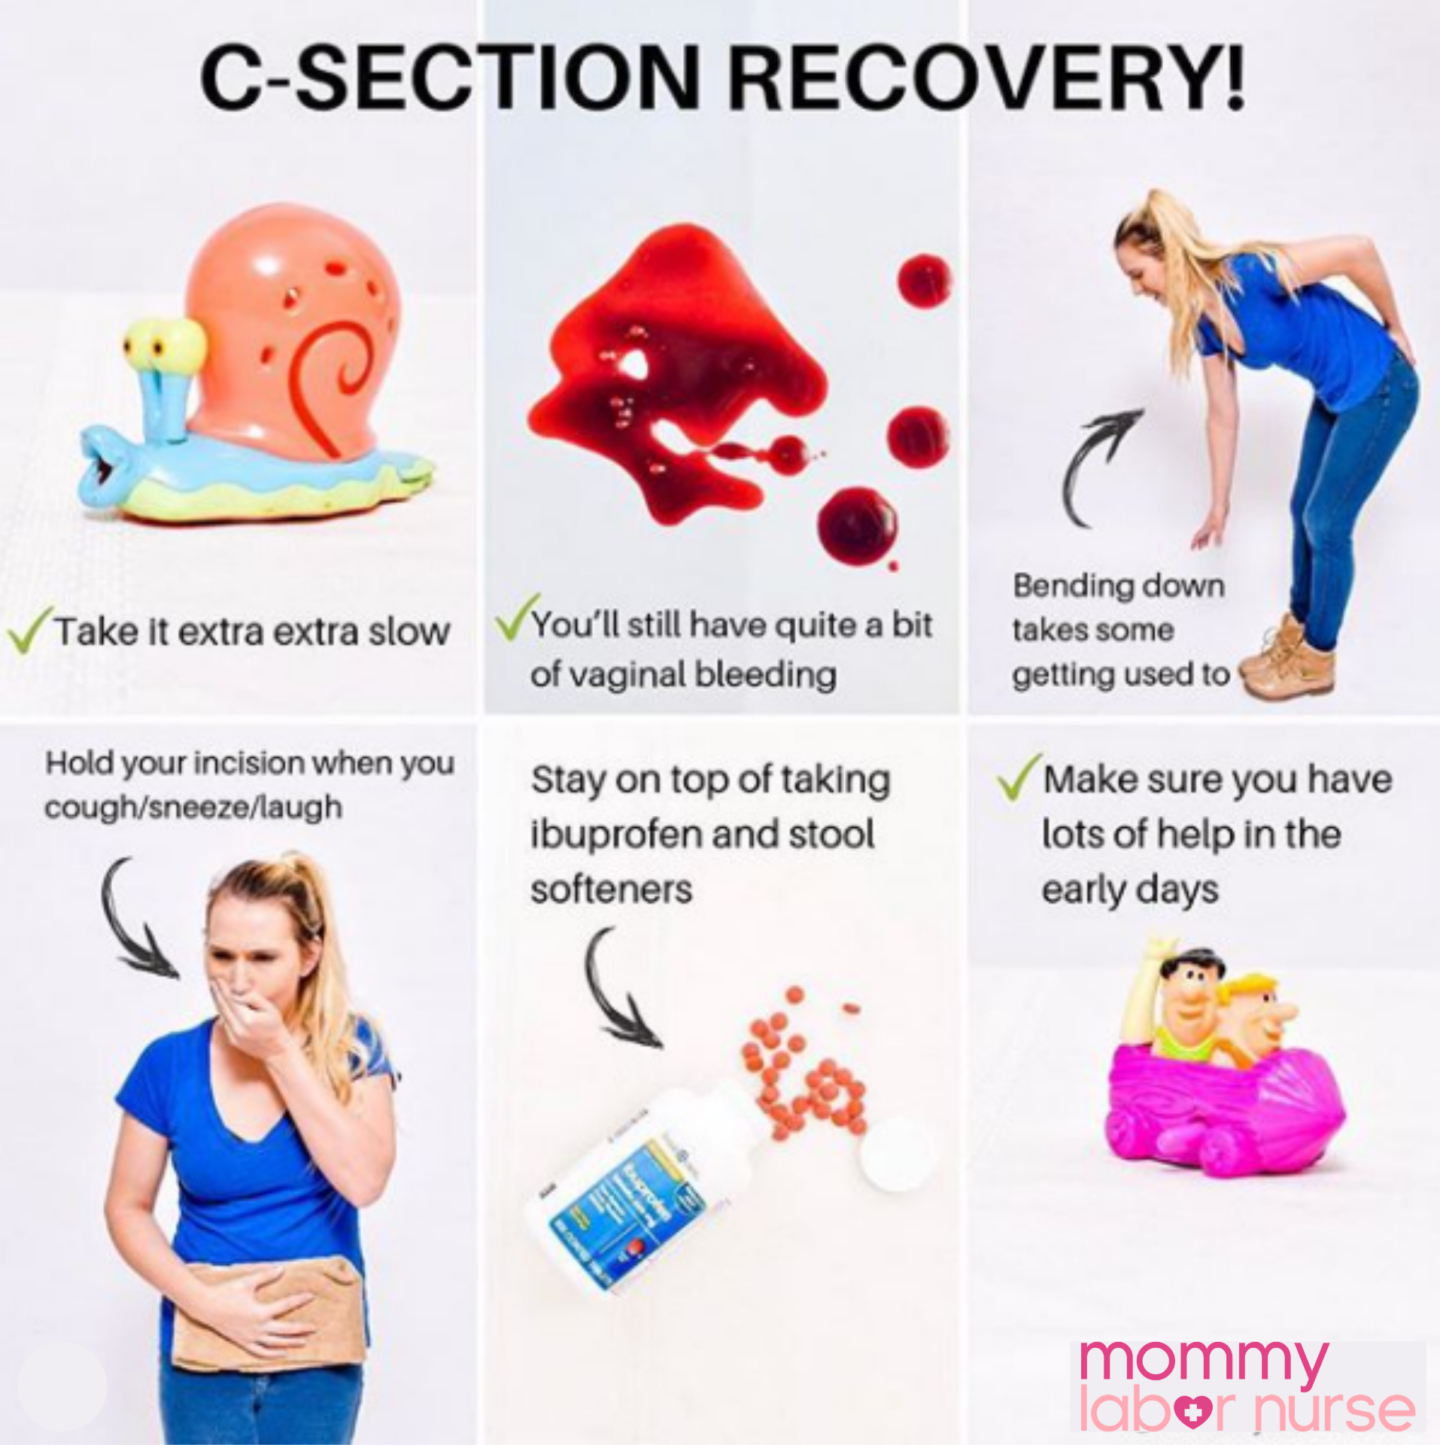 c section recovery tips infographic